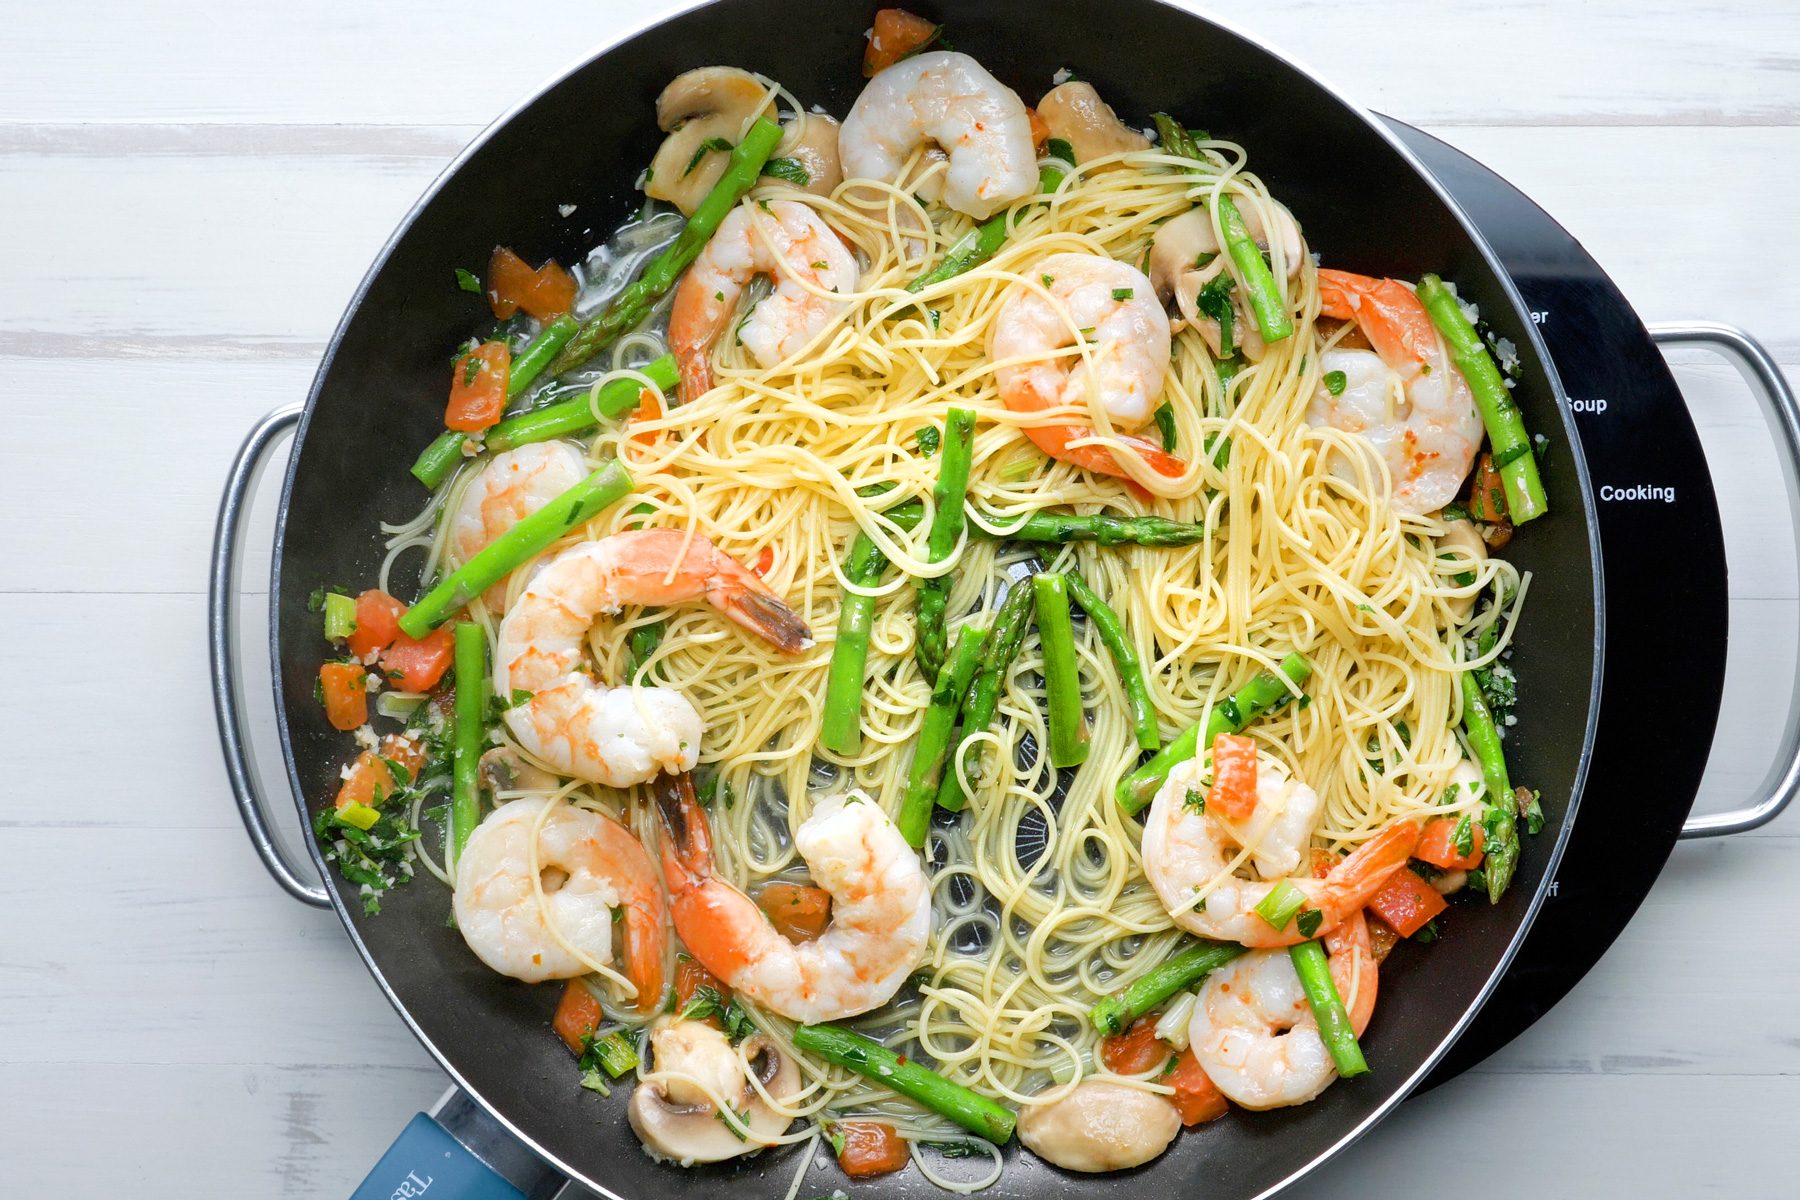 Noodles, Shrimps and vegetables are cooking in a small skillet